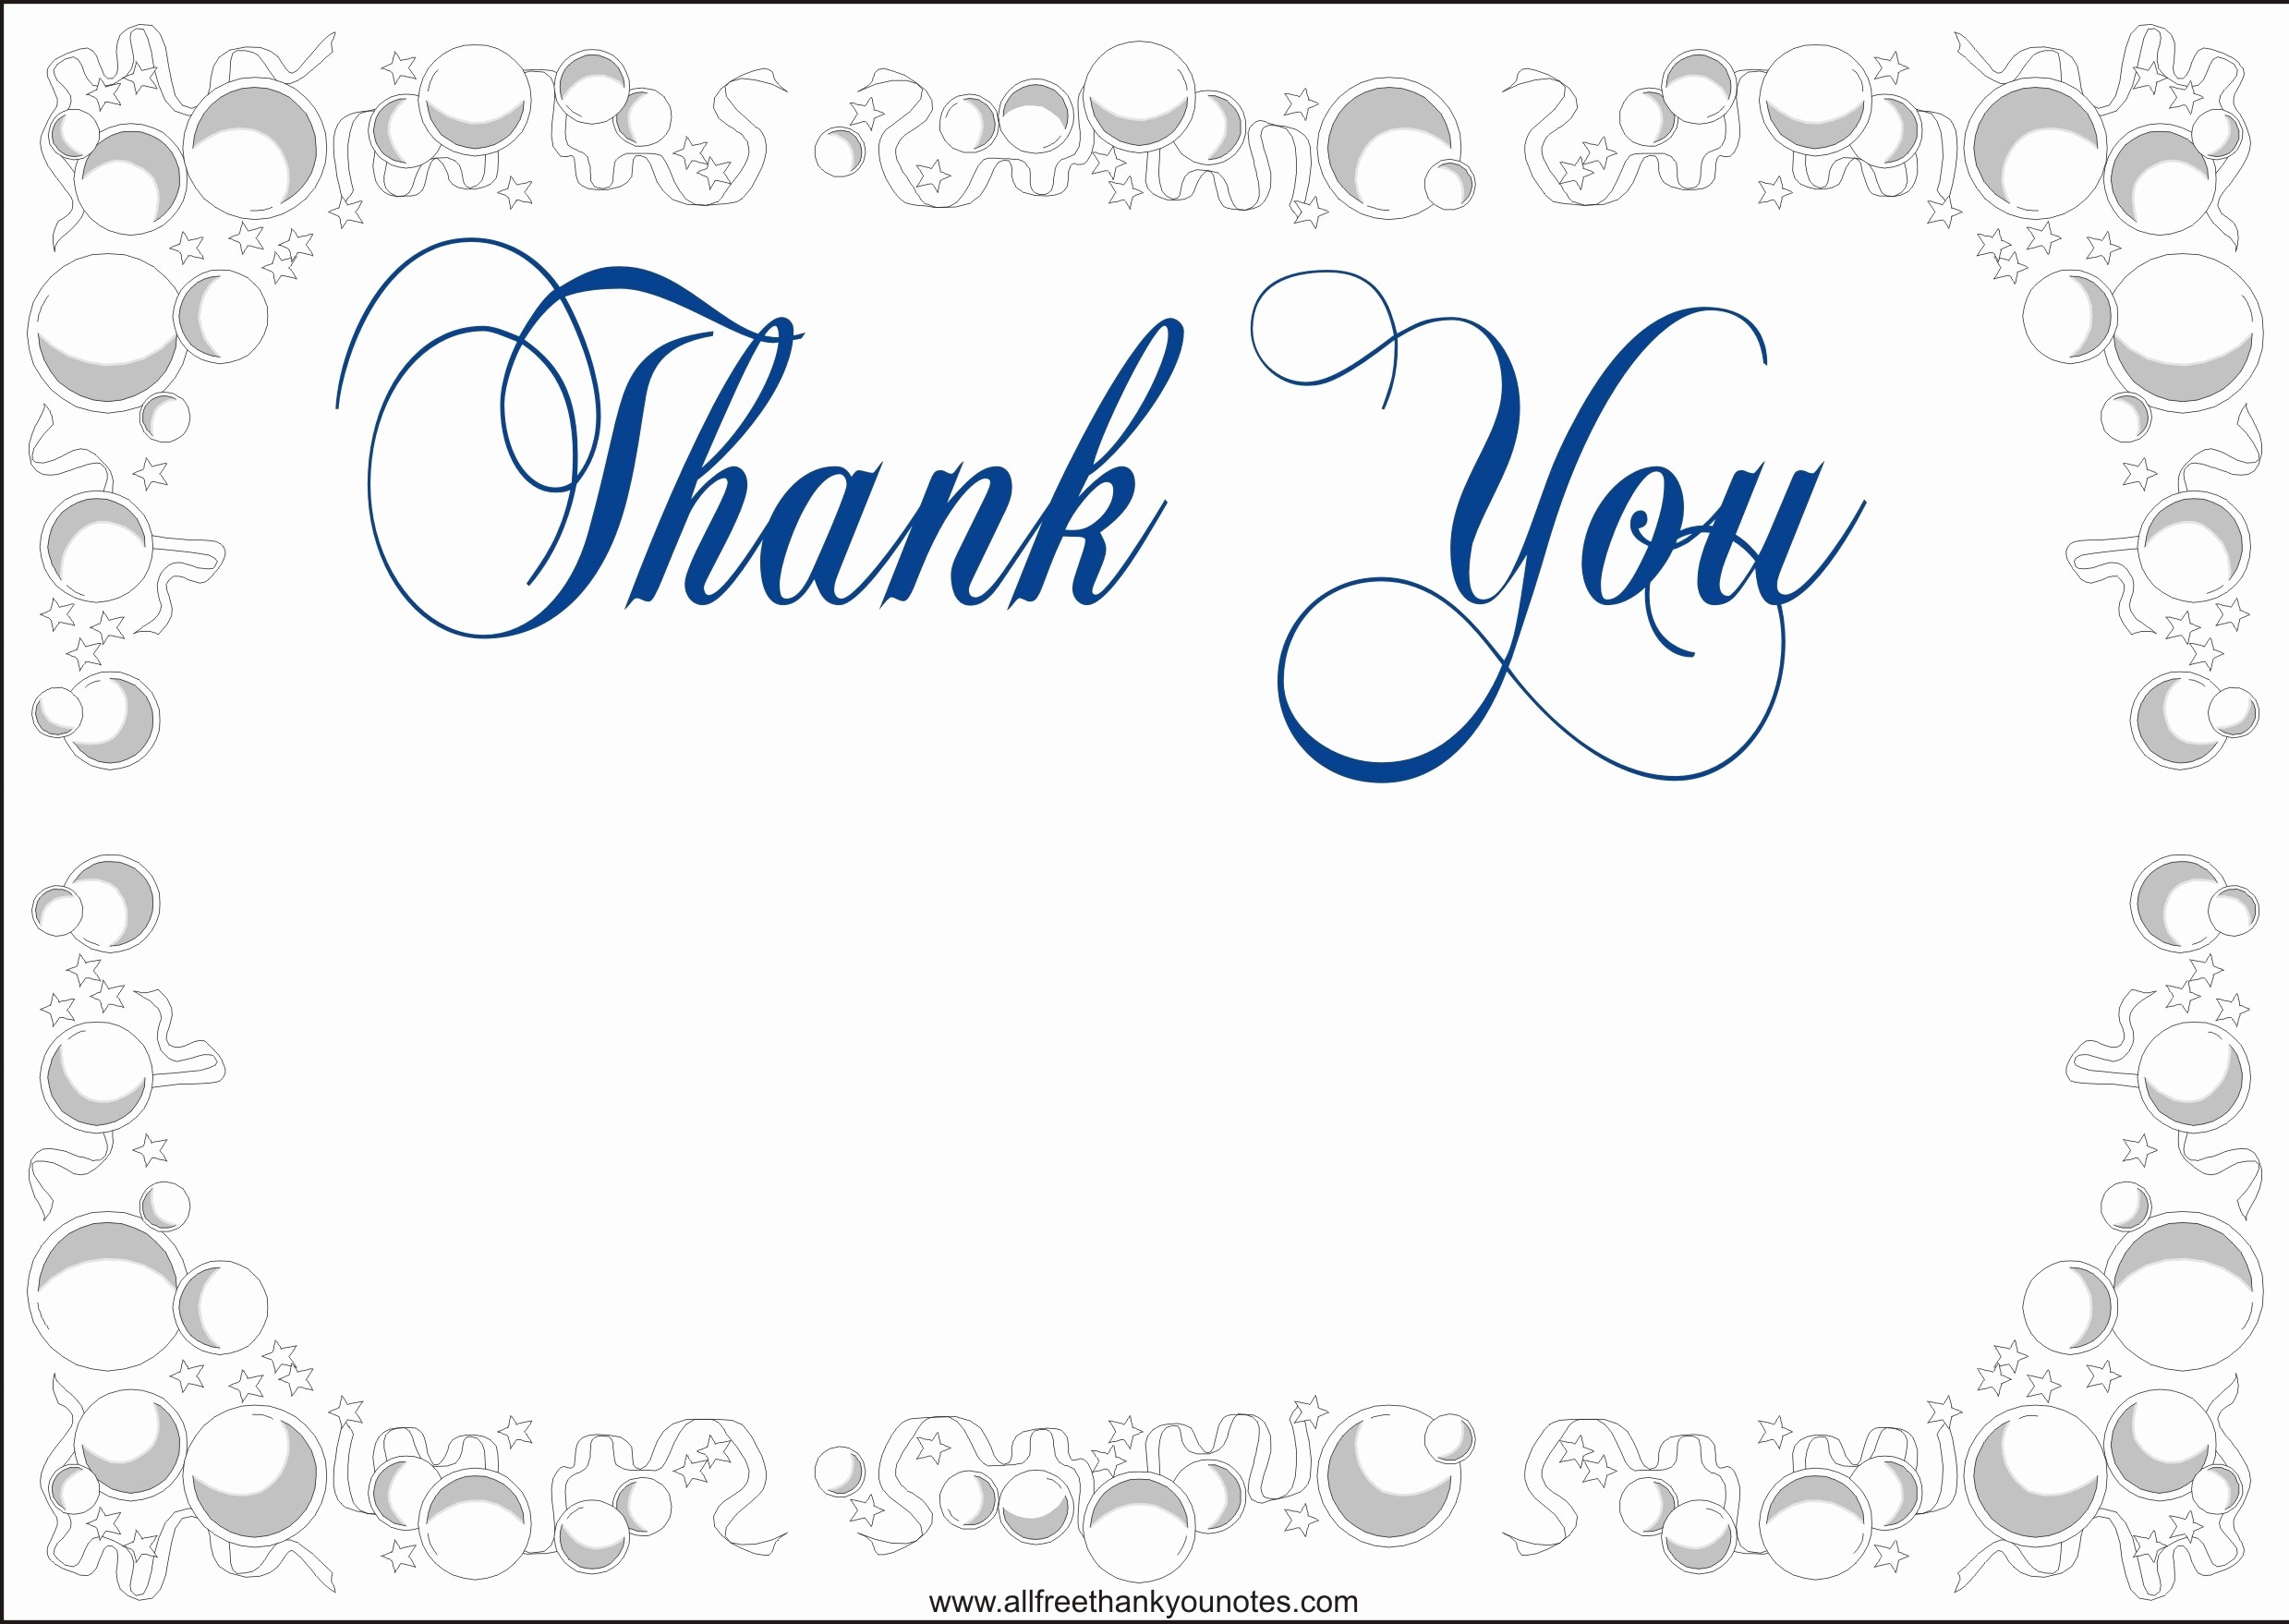 Thank You Note Card Template Awesome Thank You Note Template